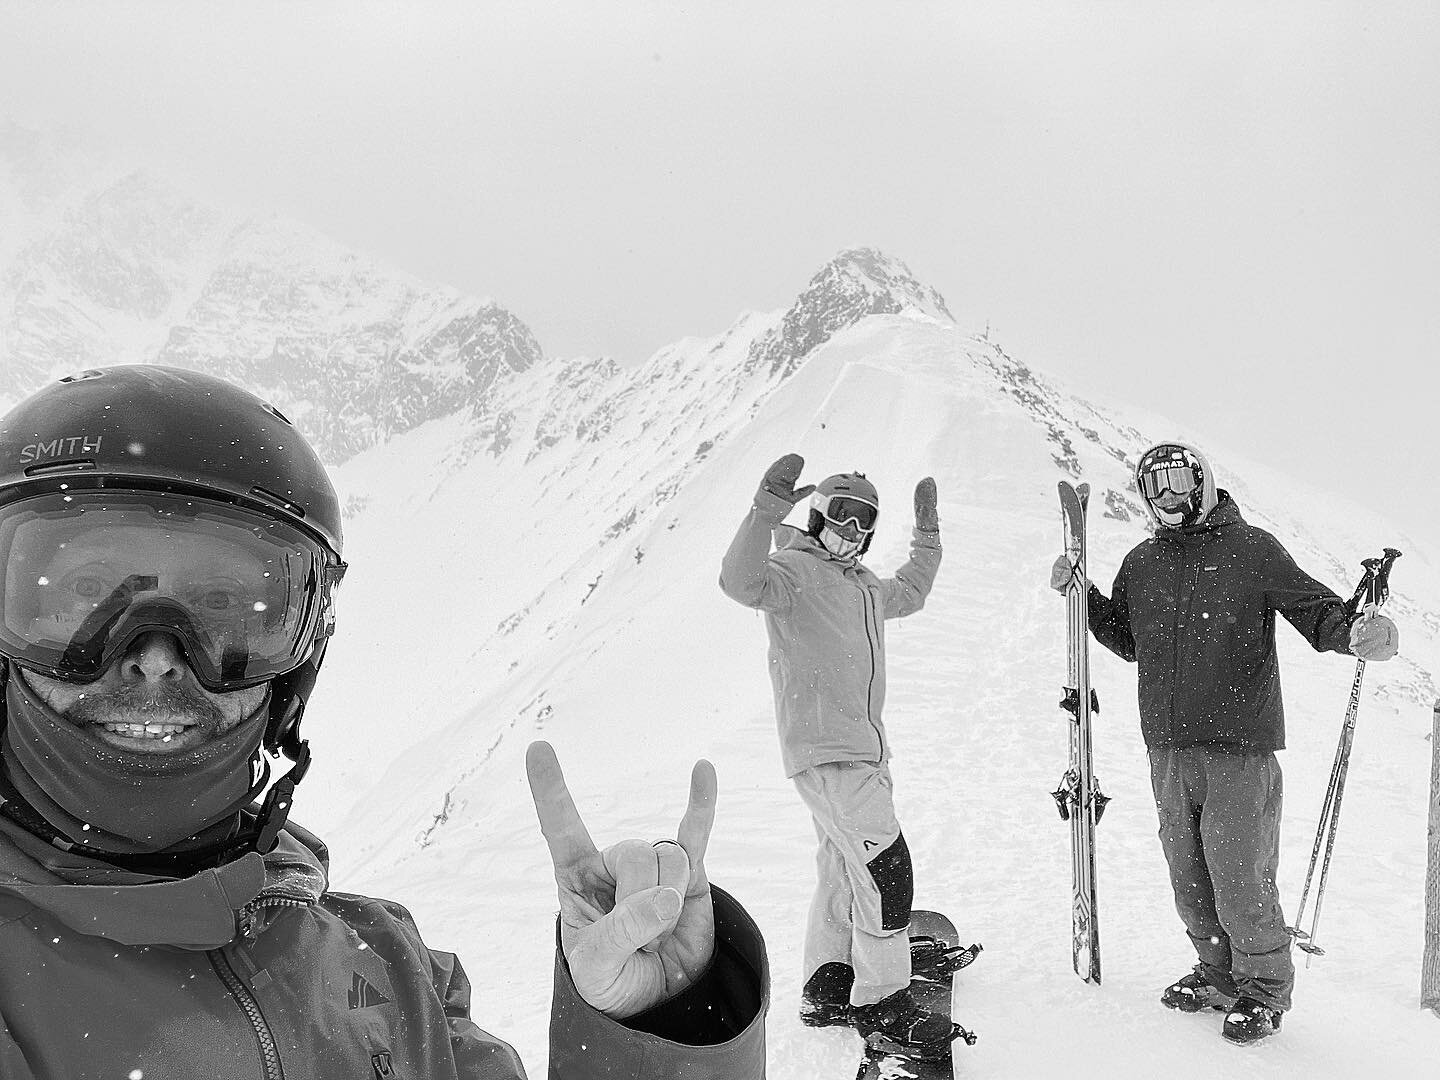 Shootout pre production powder break with a few of The Shootout  Veterans Team. All totaled we have about 16 film submissions and 52 photo submissions. We can&rsquo;t wait to share them with you Big Sky!